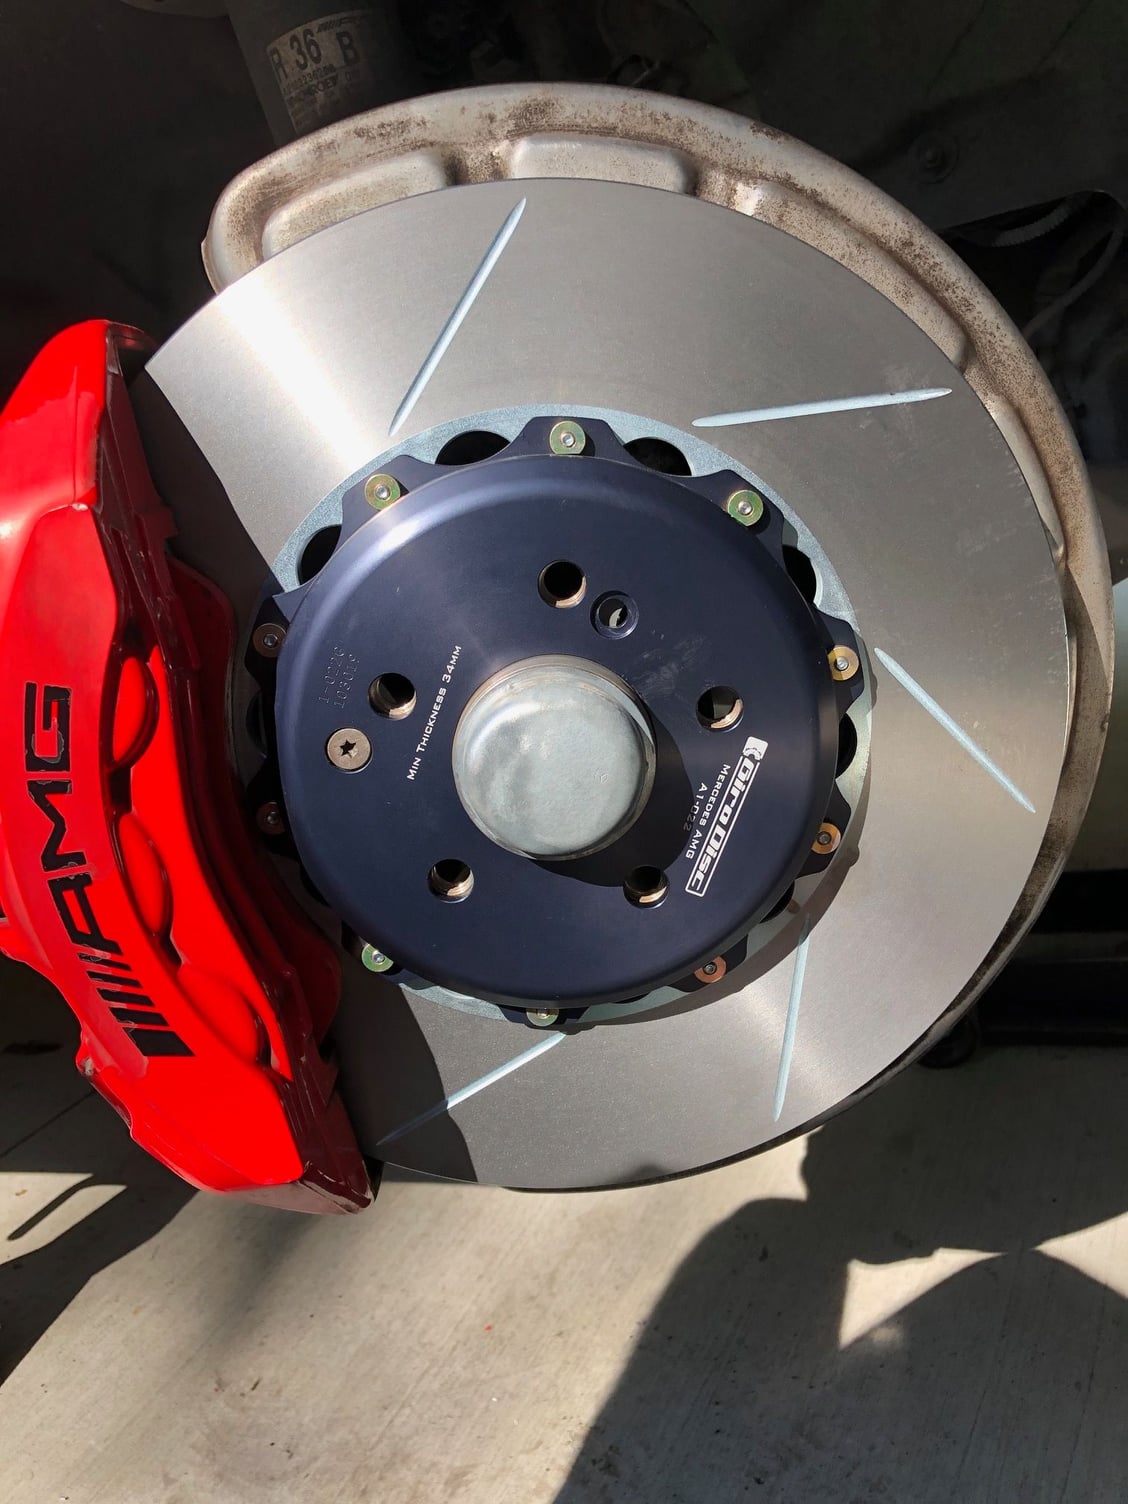 cheapest place to get brakes done in tulare